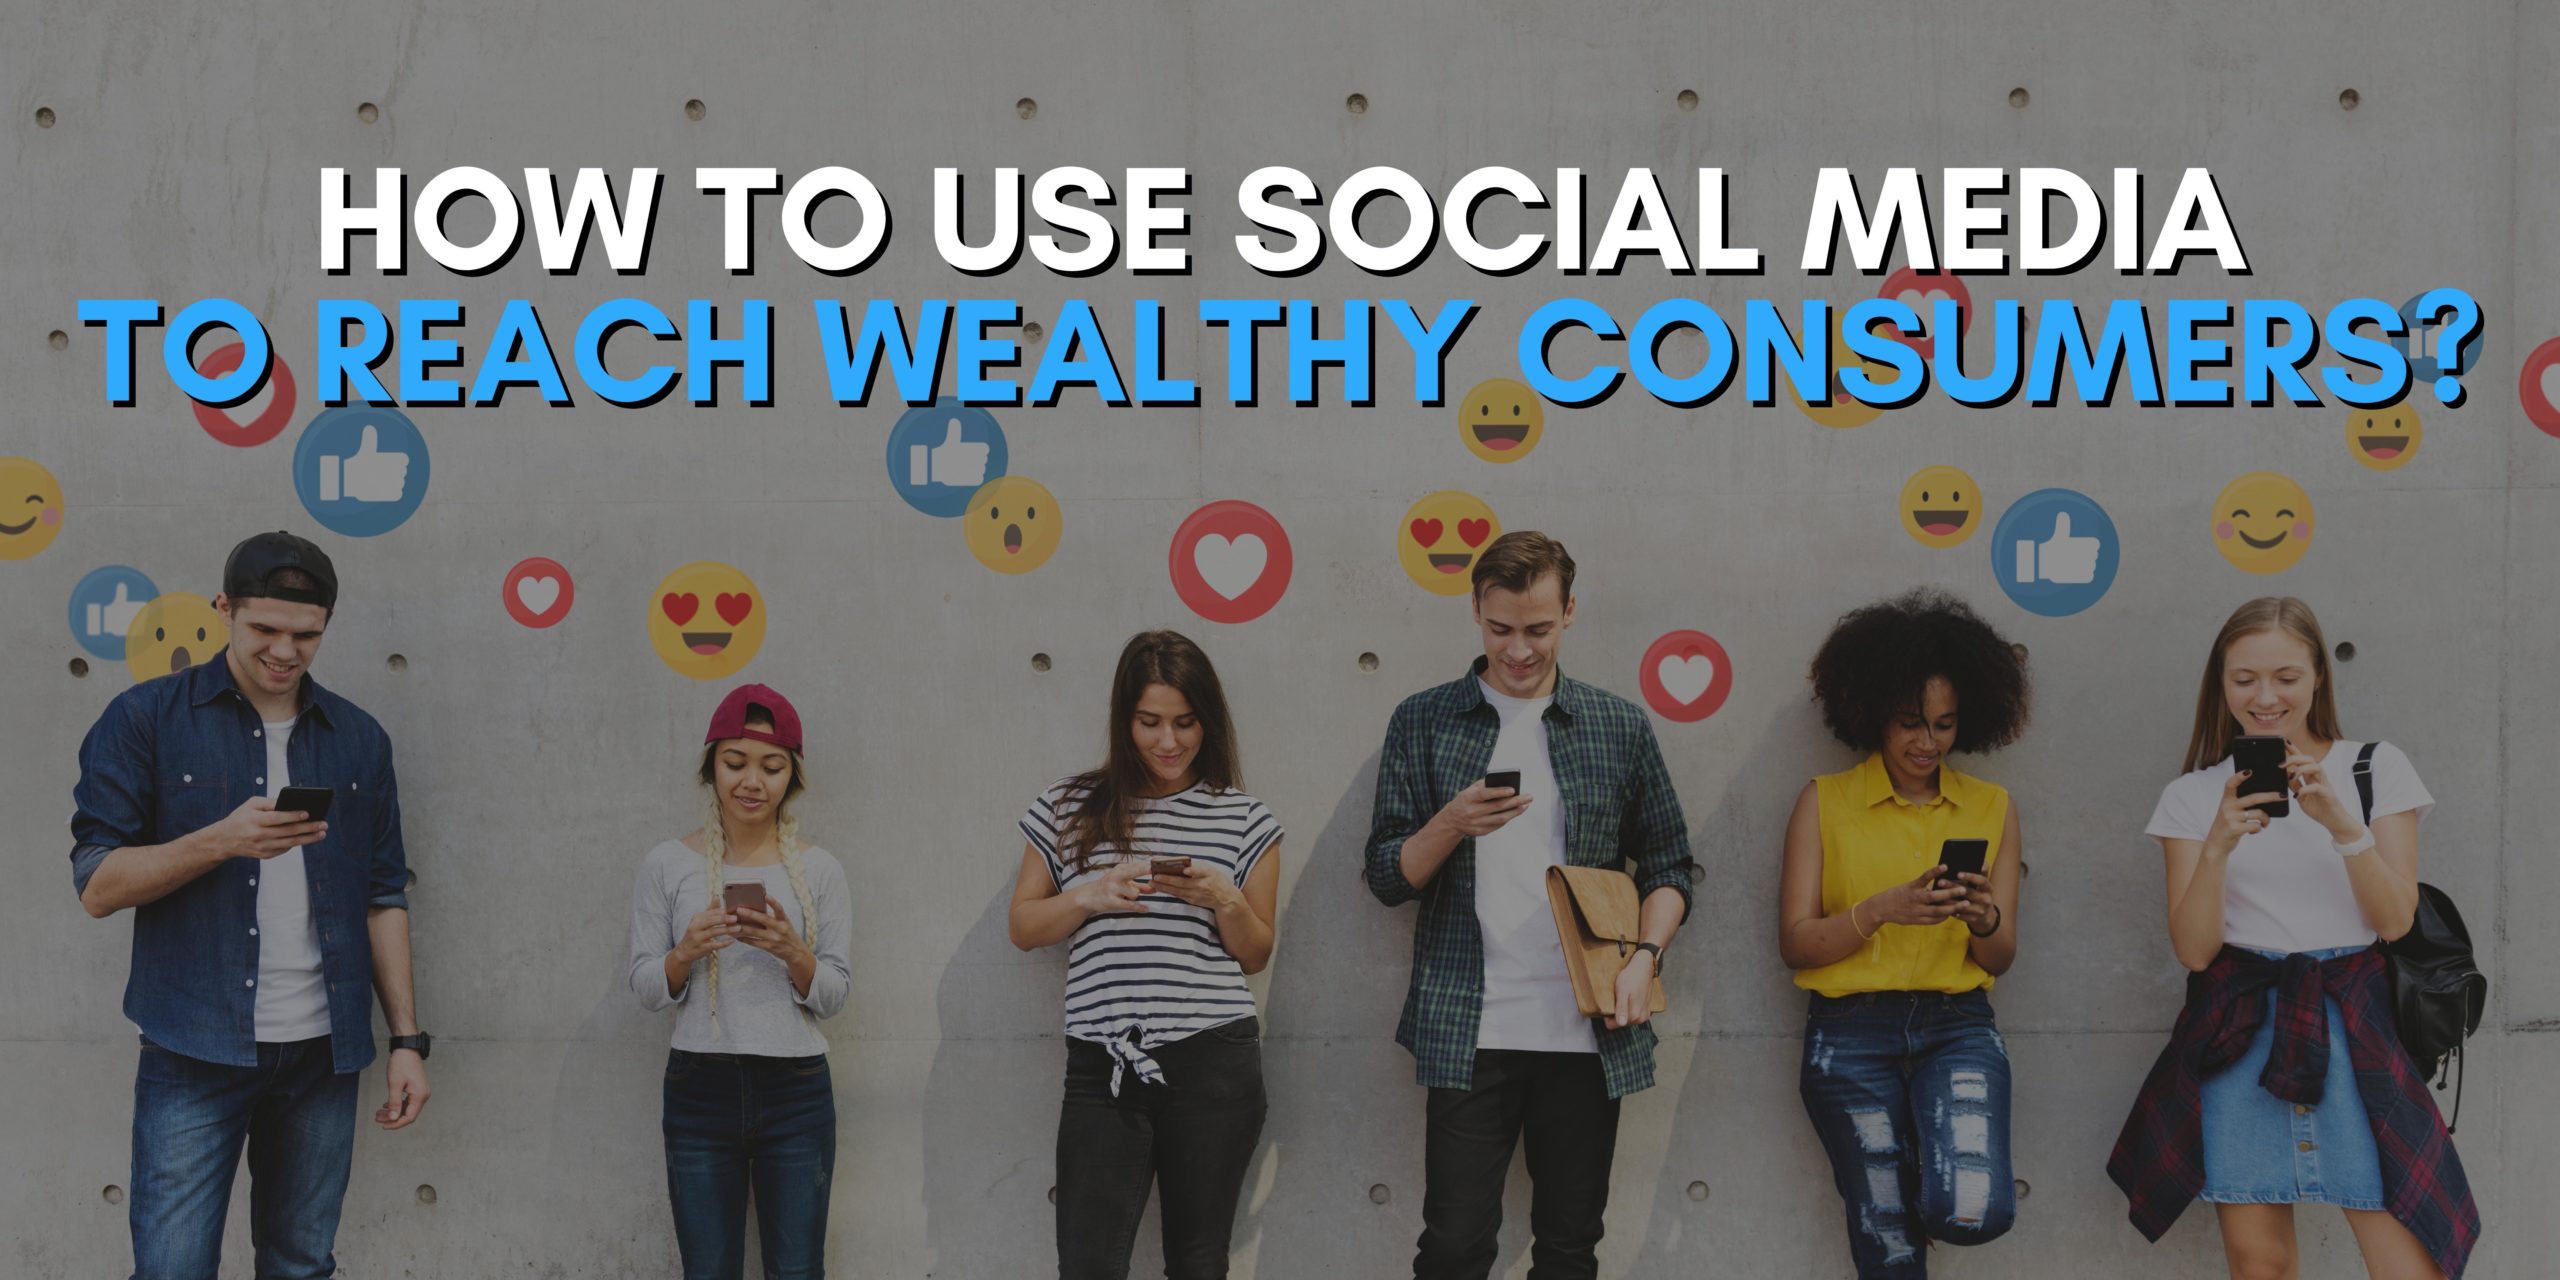 How To Use Social Media To Reach Wealthy Consumers?